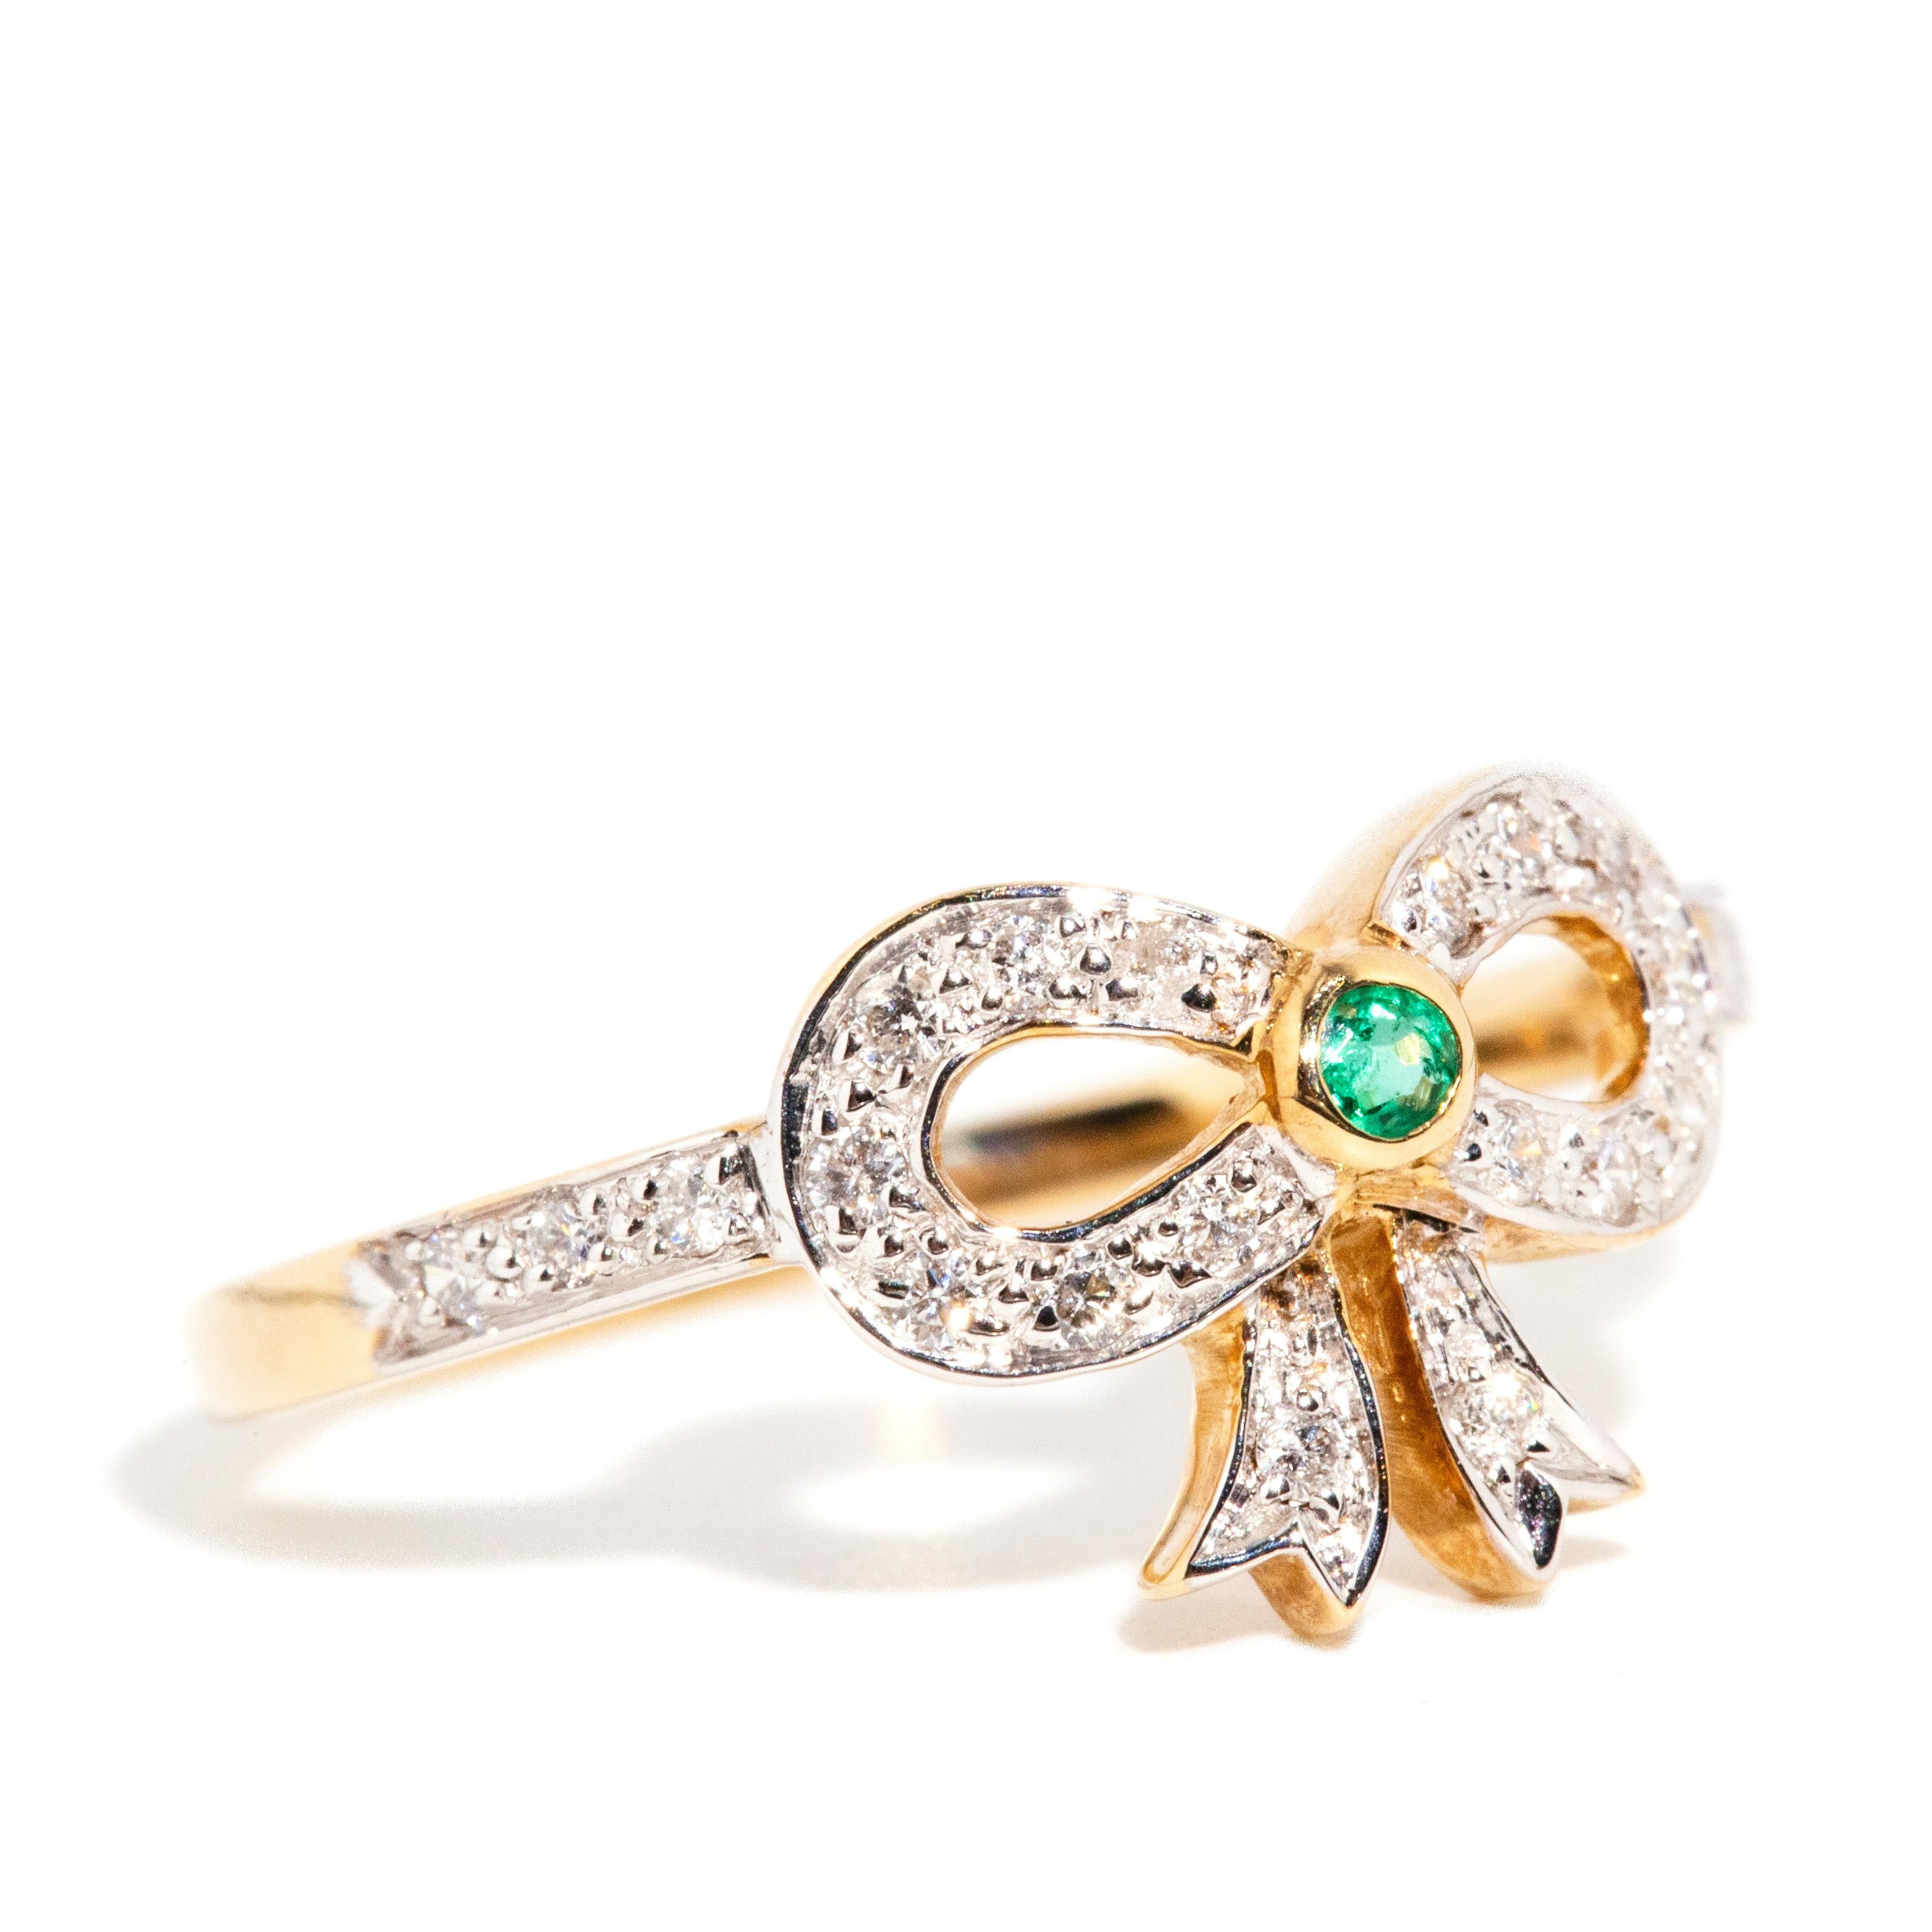 Contemporary Vintage Inspired Bright Green Emerald & Diamond Bow Ring 9 Carat Yellow Gold